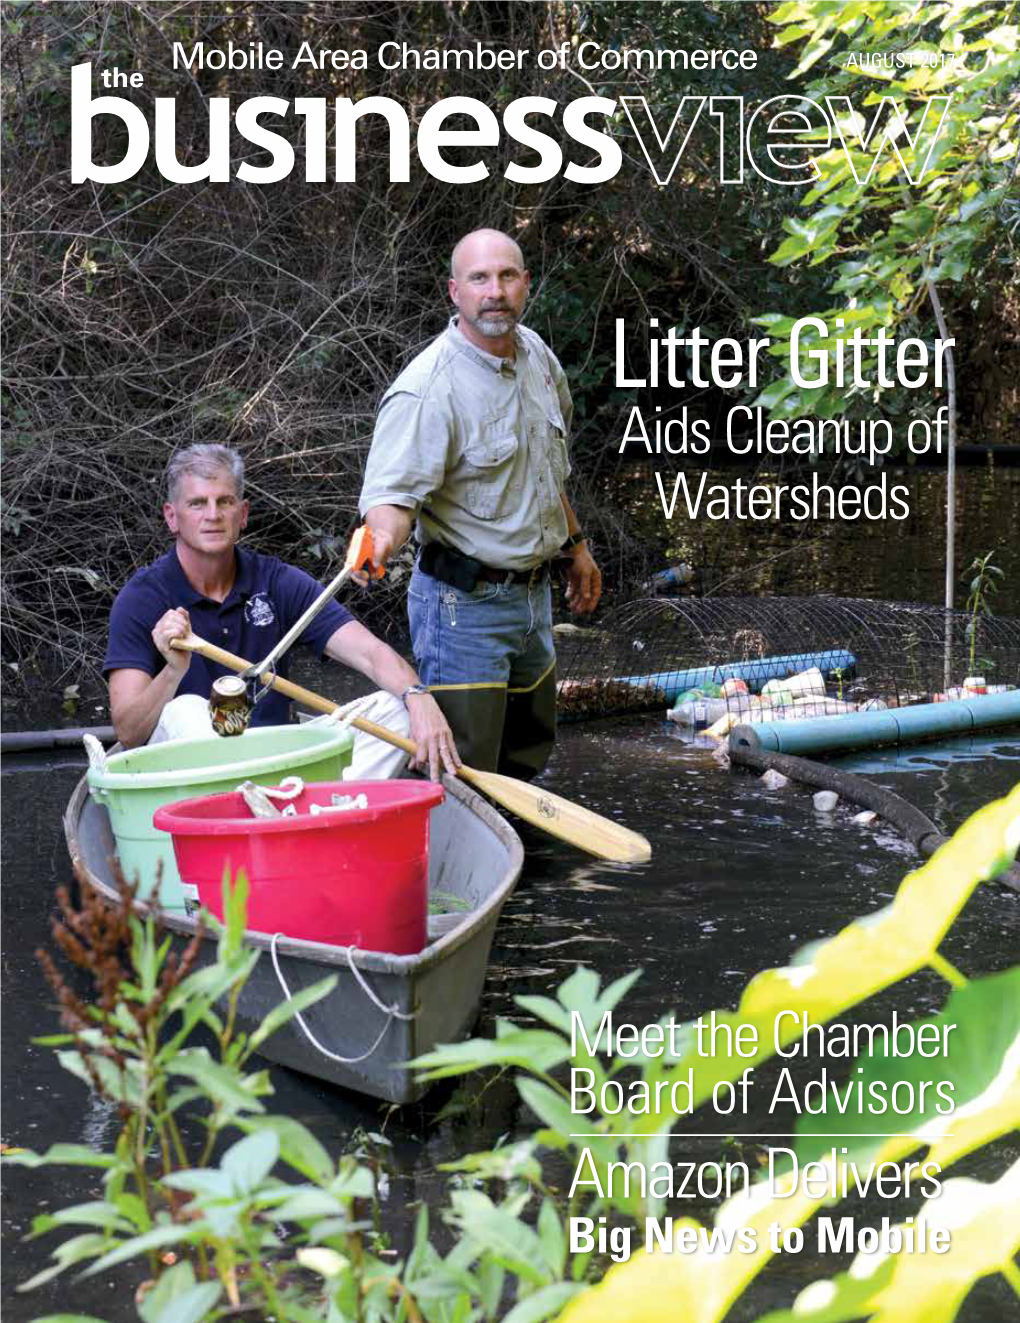 Litter Gitter Aids Cleanup of Watersheds